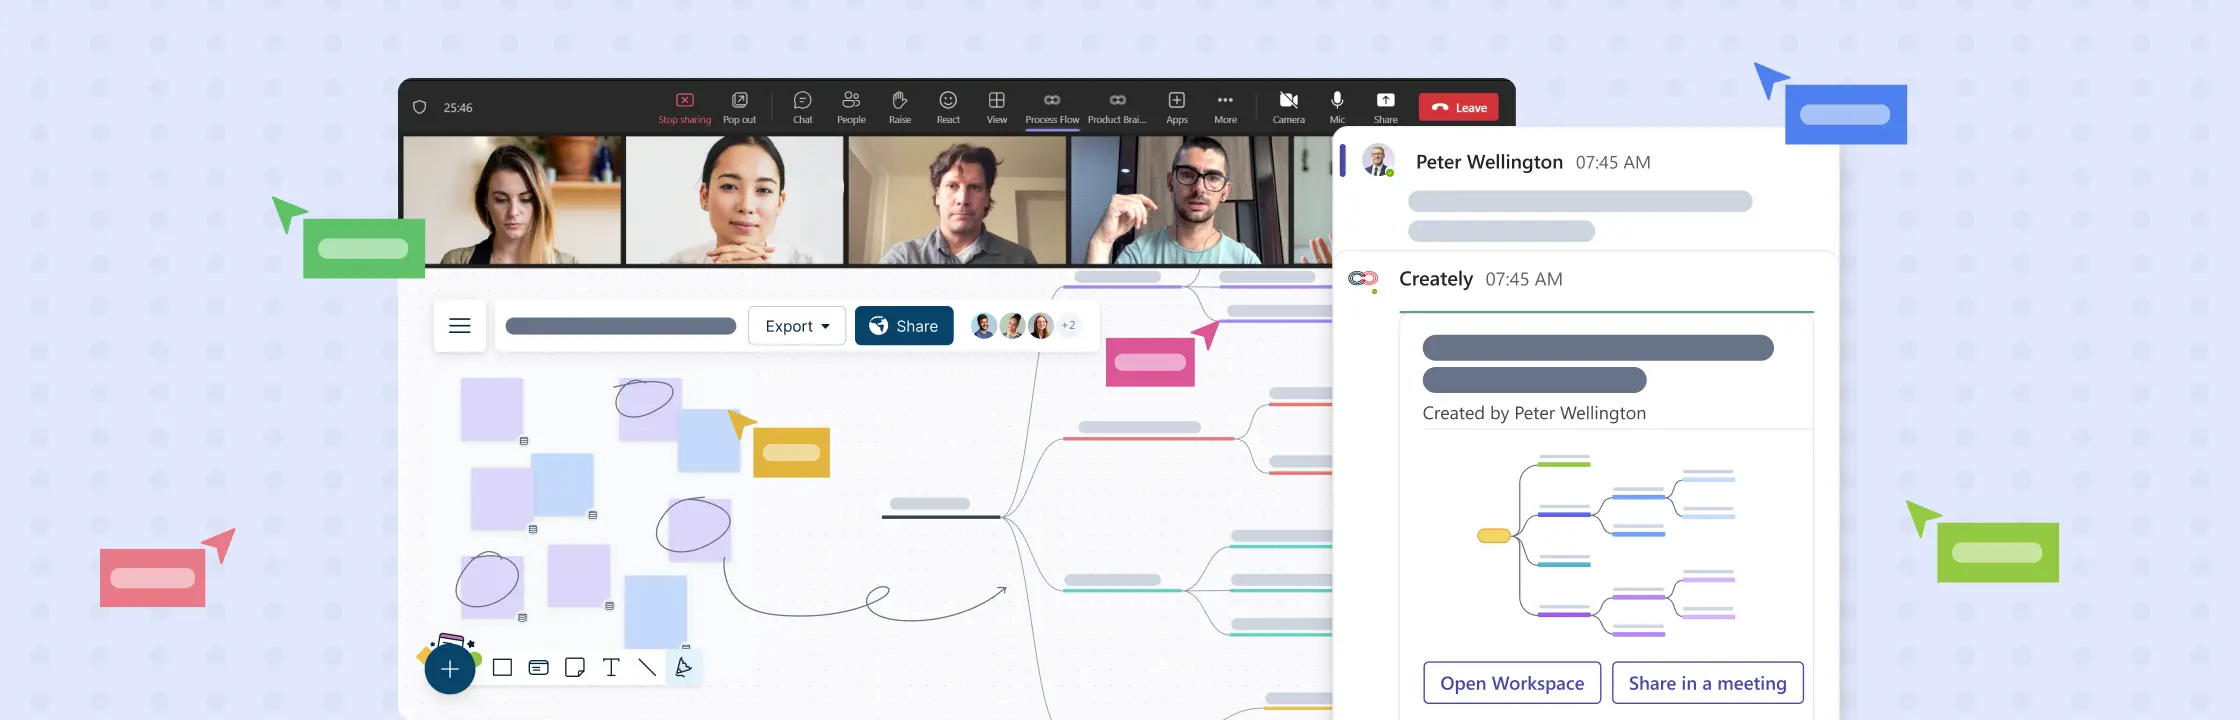 How to Boost Your Team Brainstorming Session on Microsoft Teams with Creately